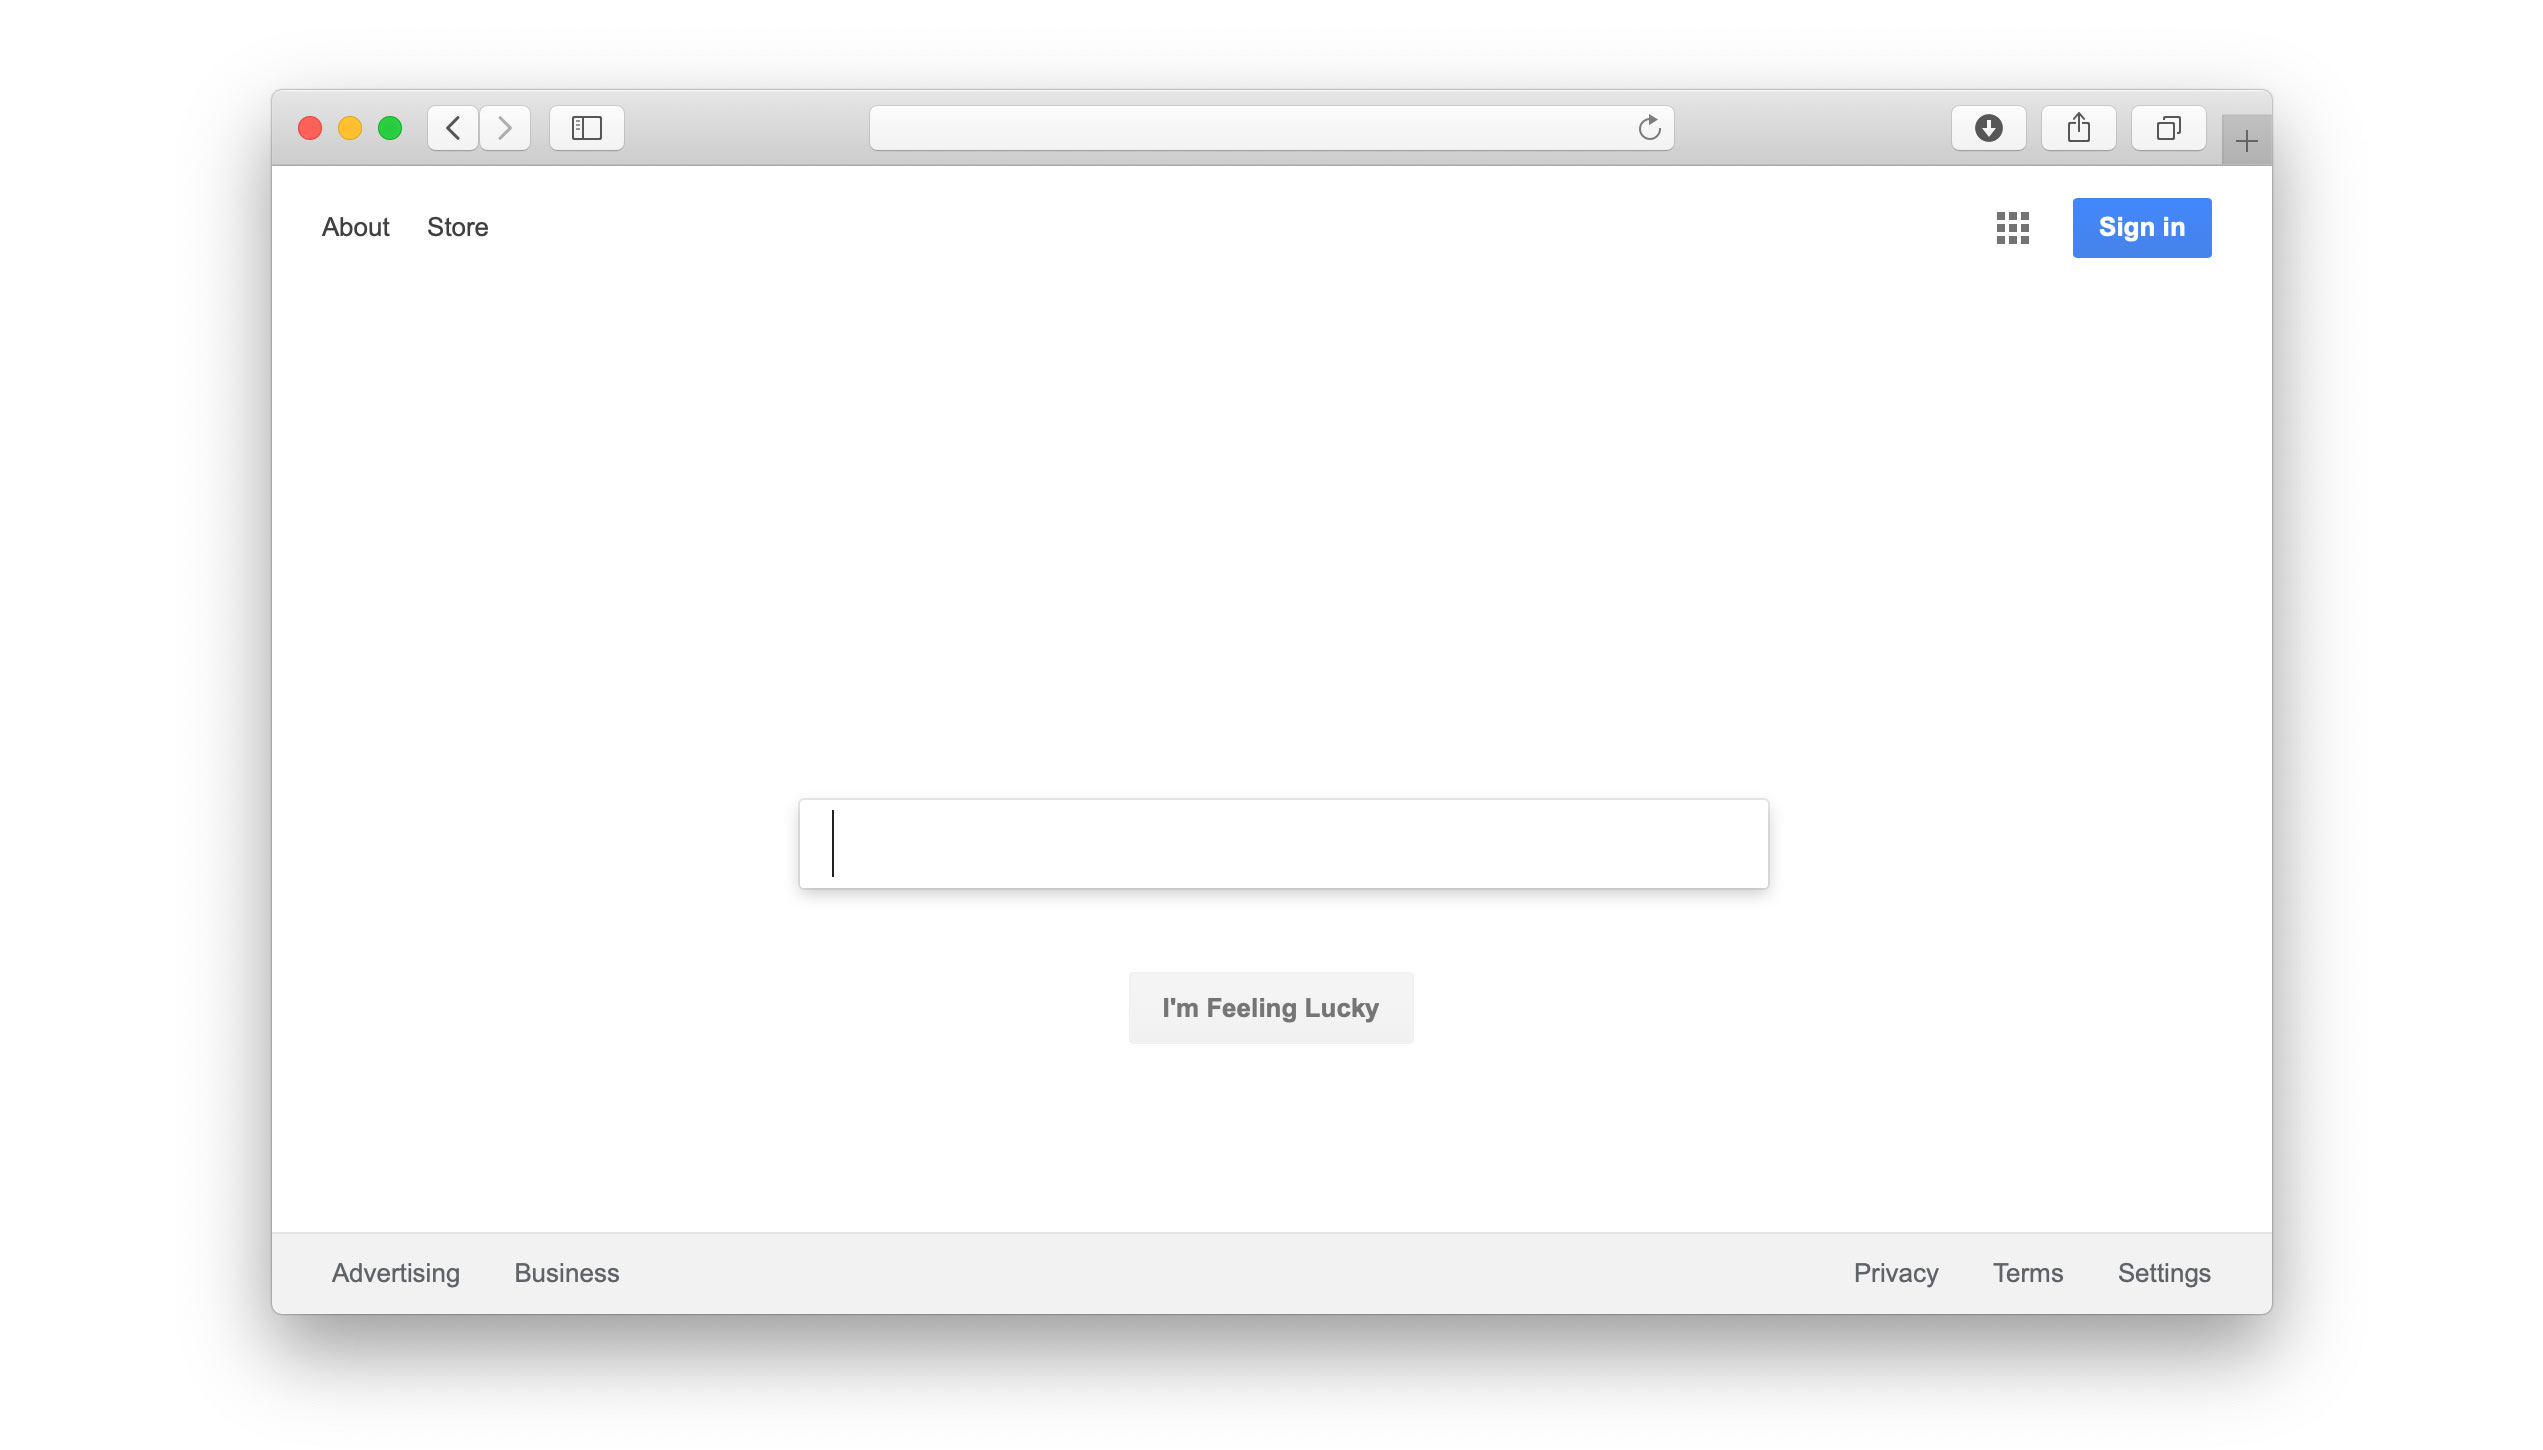 Contact Page screen design idea #402: Life without Google (Fonts)